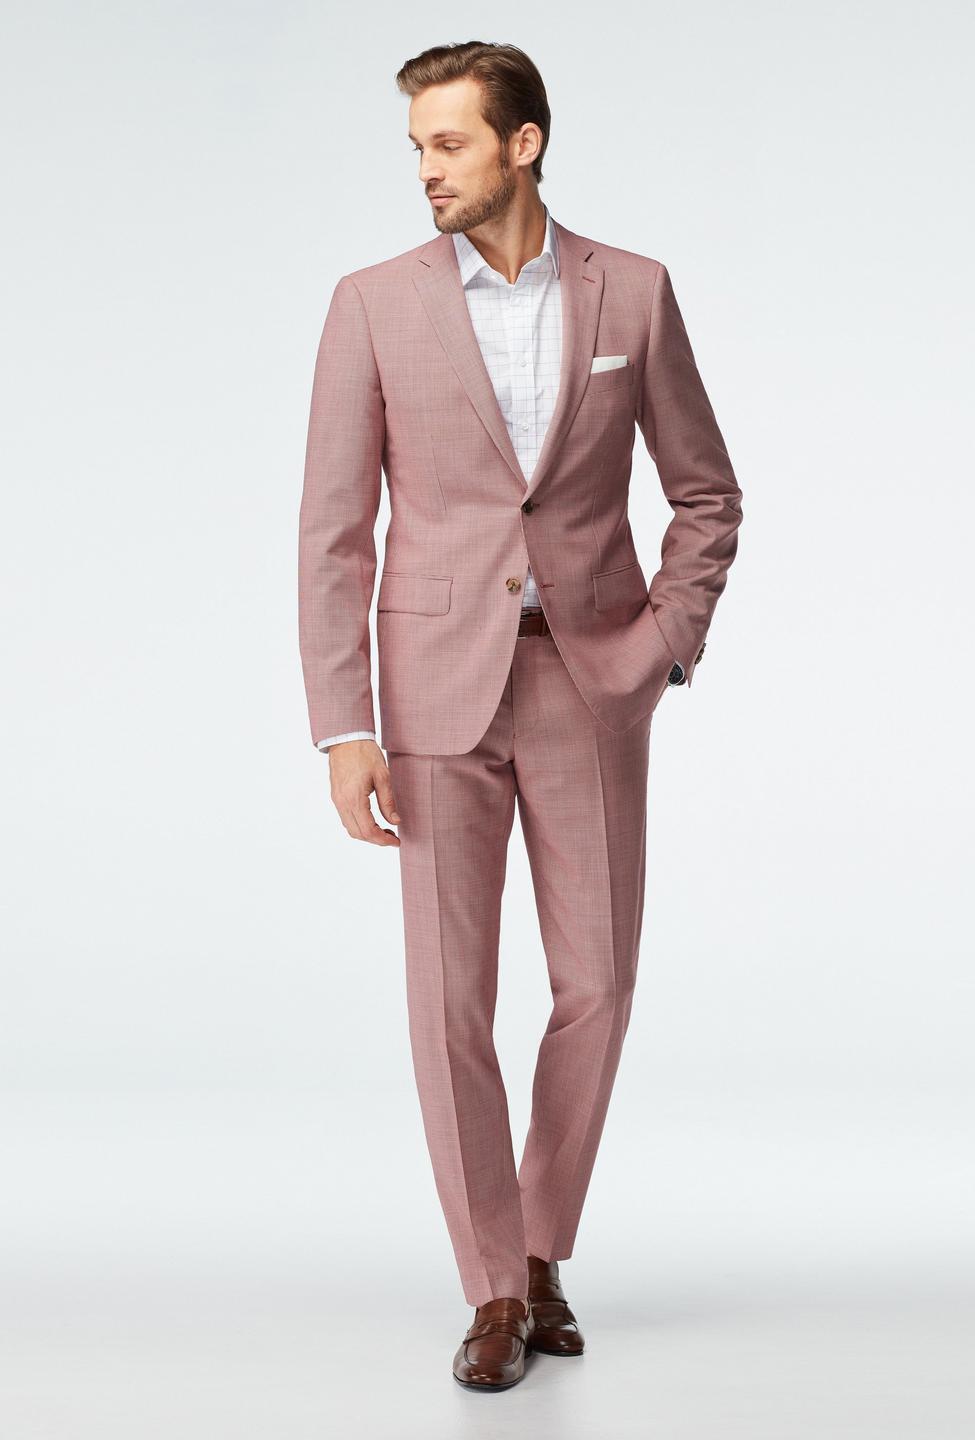 SUMMER WEDDING SUIT TRENDS: THE PERFECT BLEND OF FORMALITY AND COMFORT